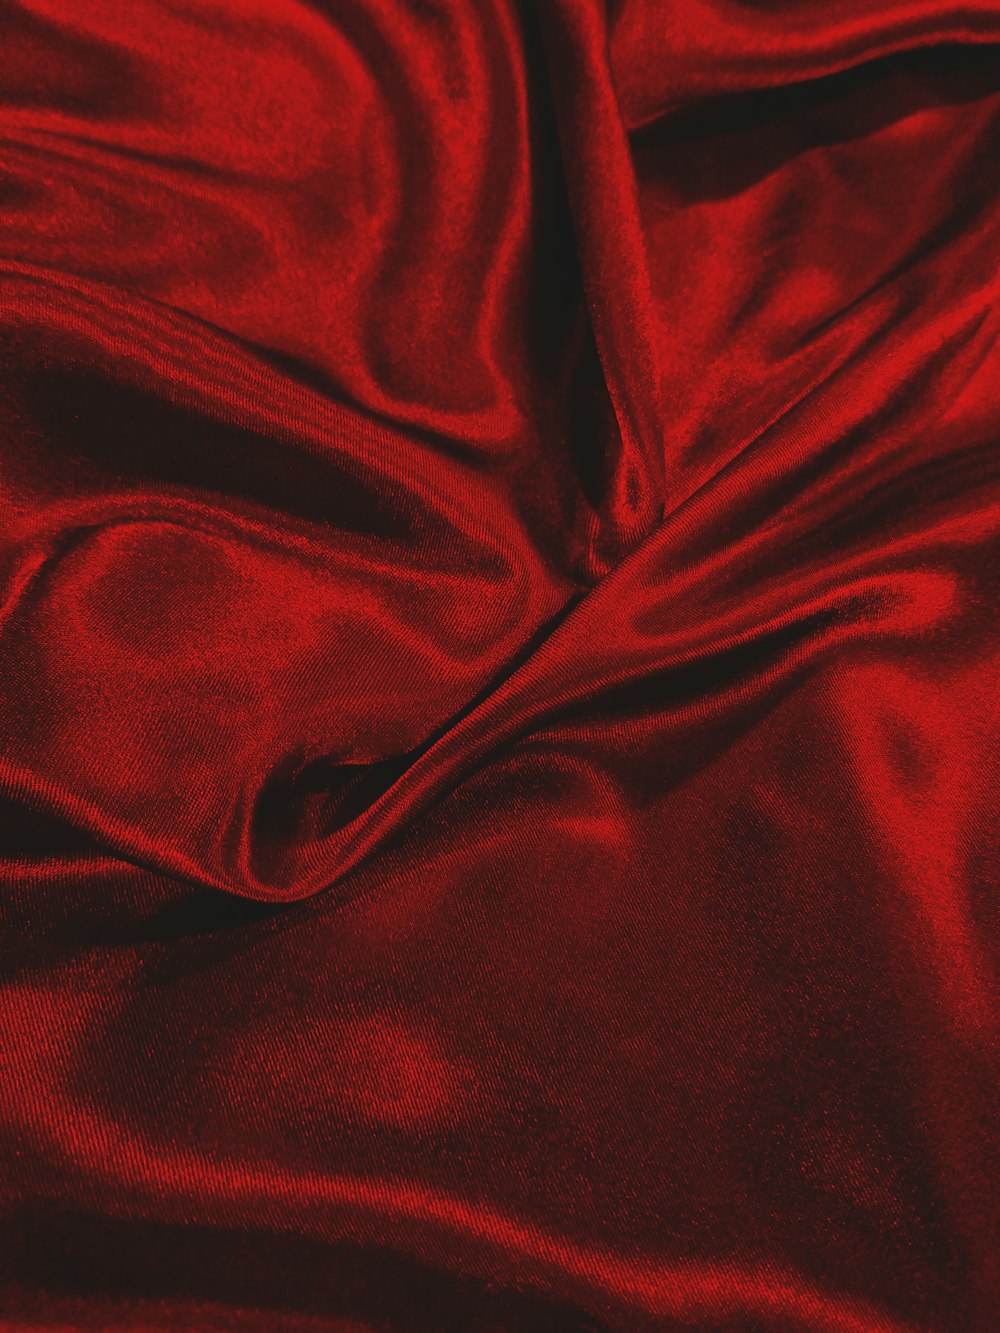 Best Blood Red Pictures [HD] | Download Free Images on Unsplash